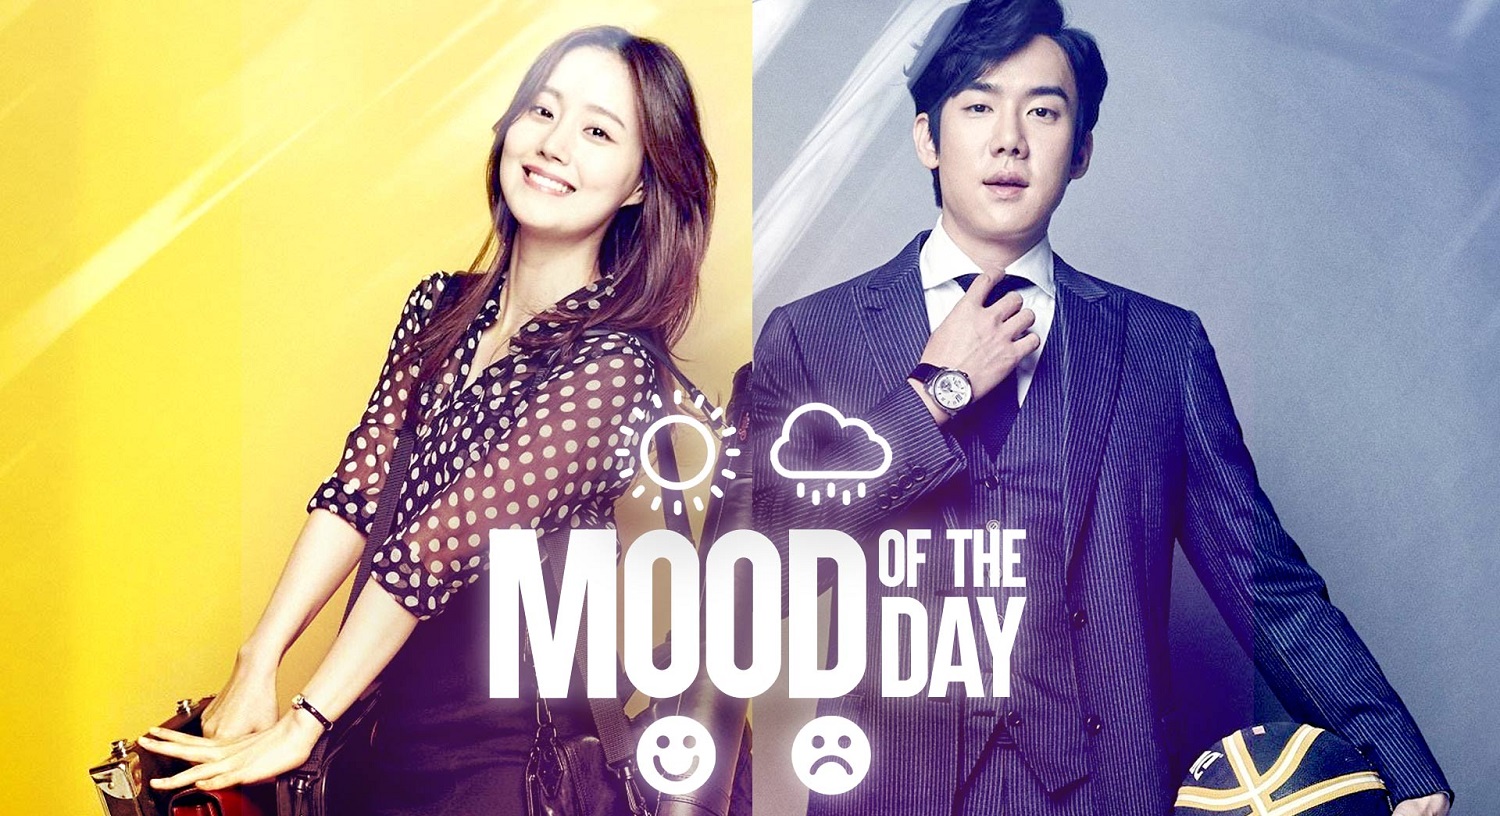 Mood of The Day (2016) Tamil Dubbed Korean Movie HD 720p Watch Online